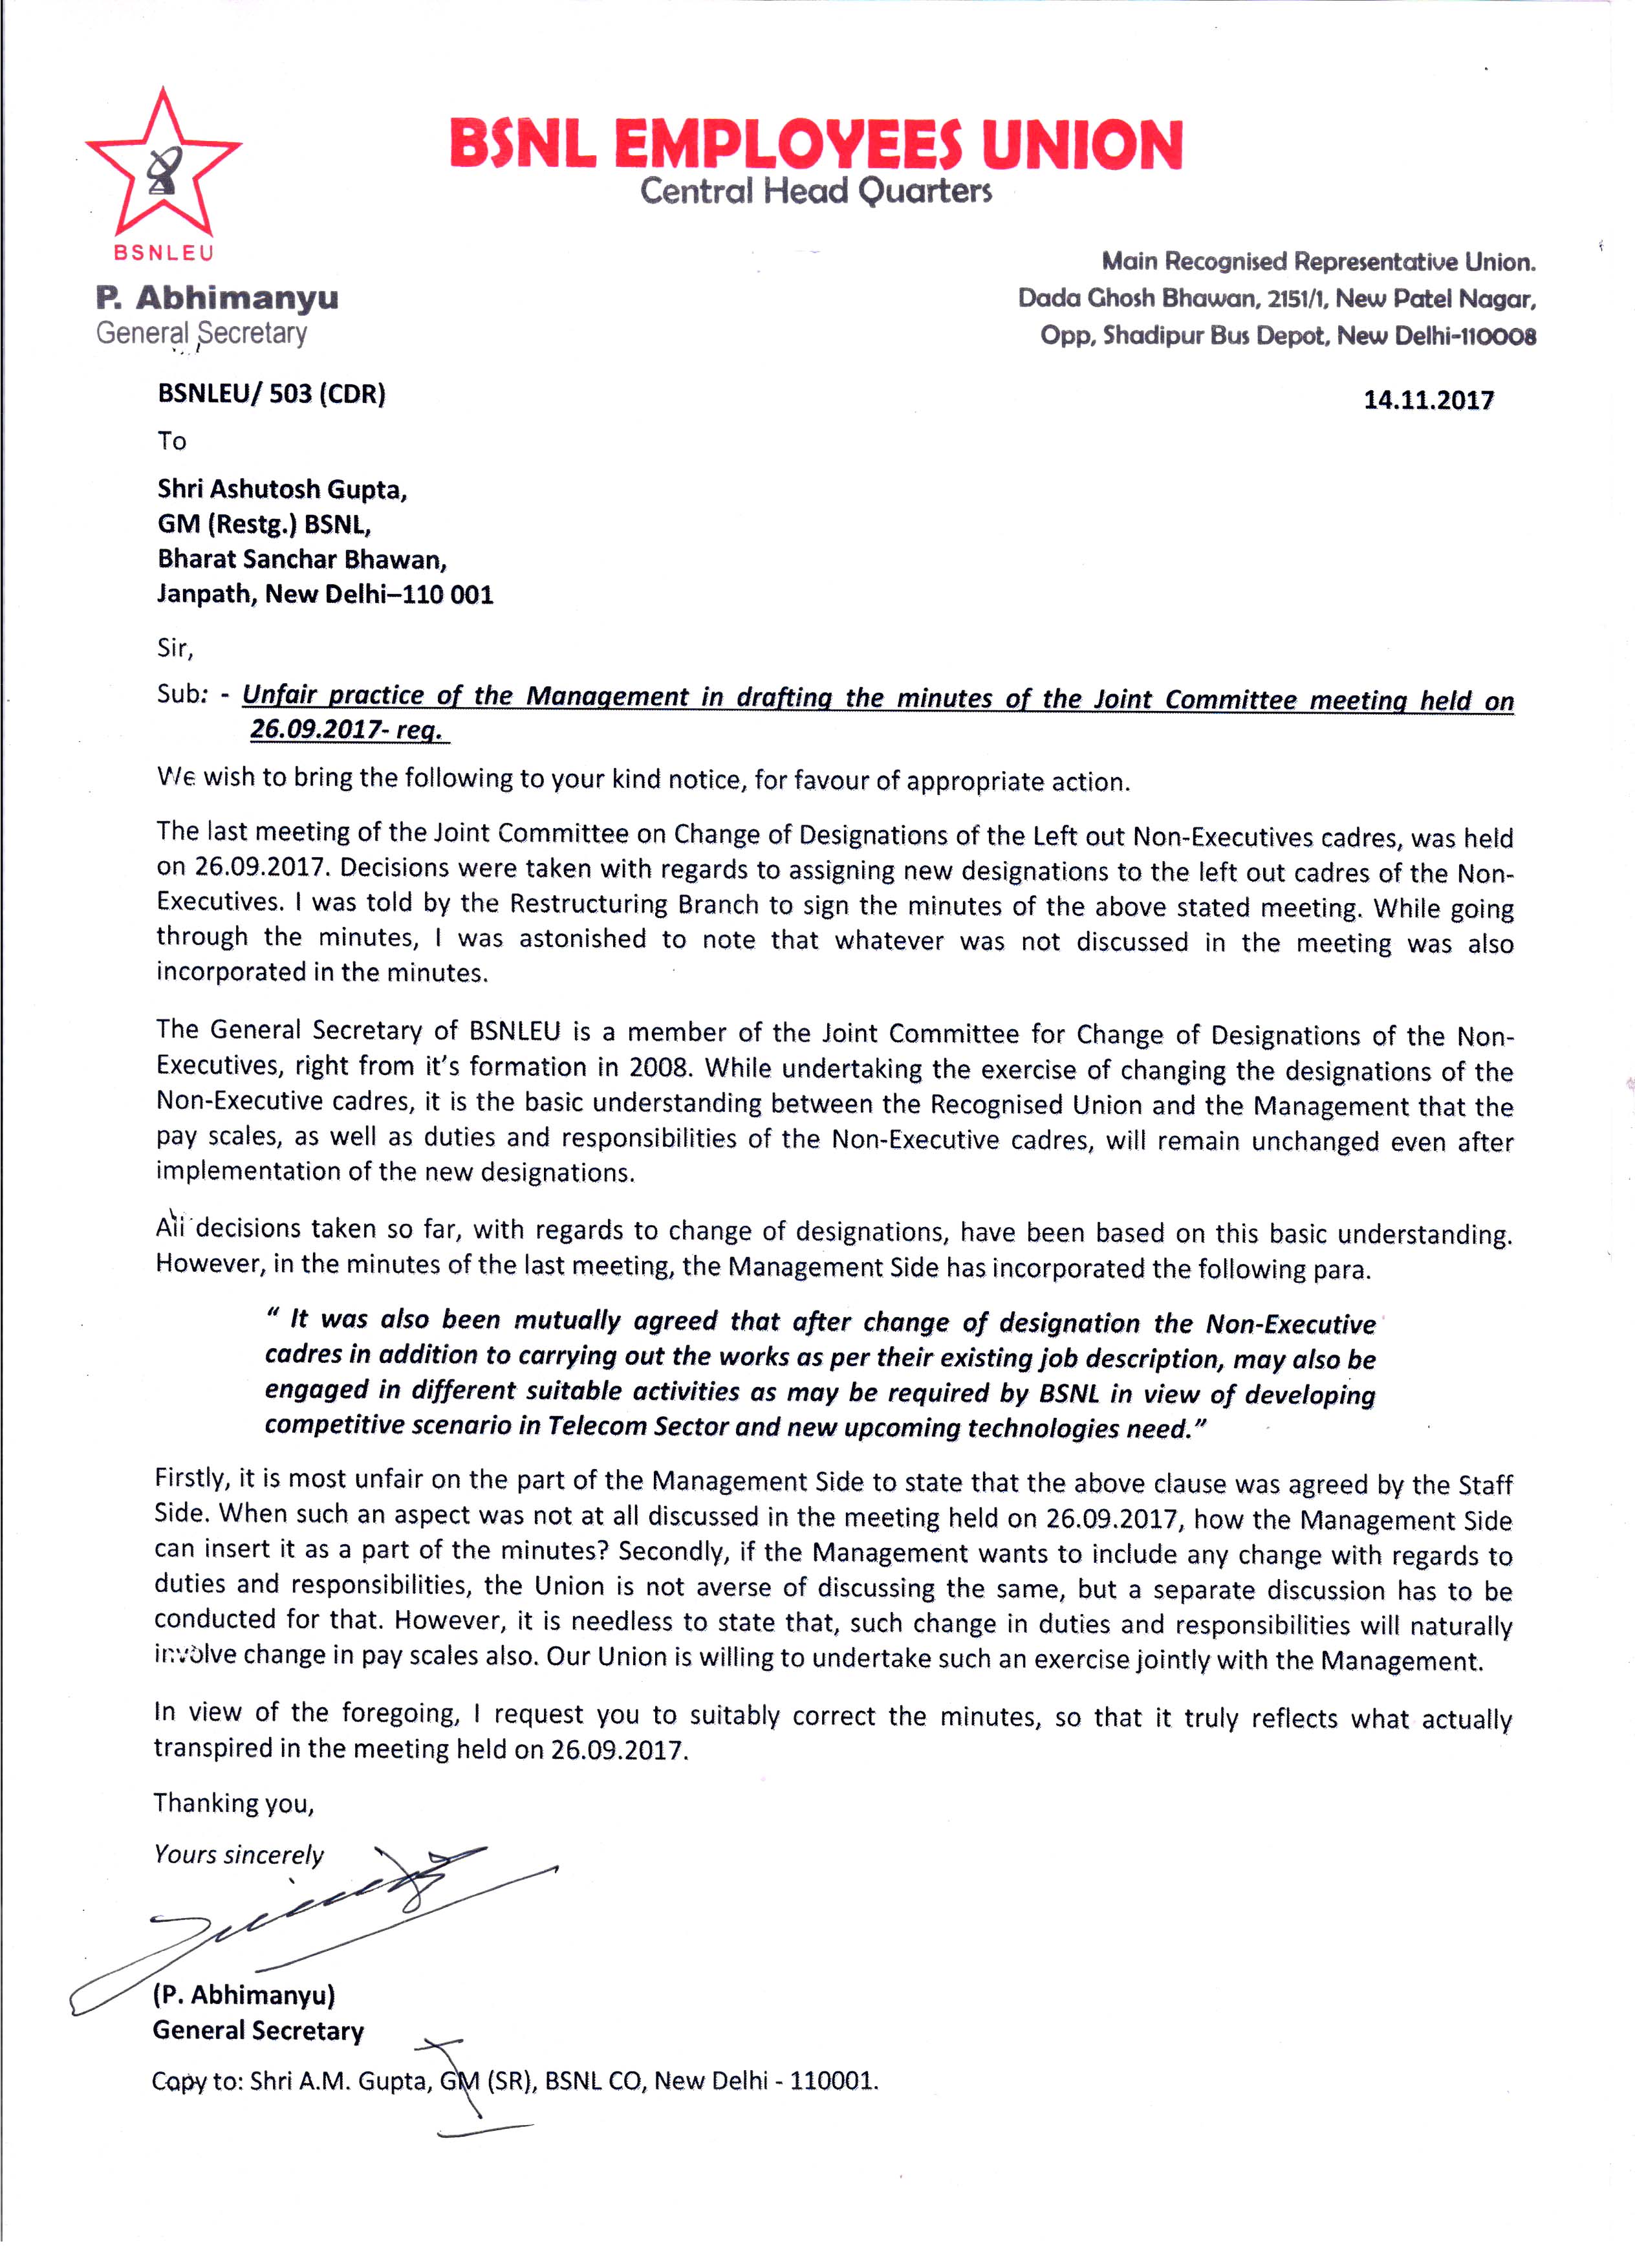 Letters - BSNL Employees Union